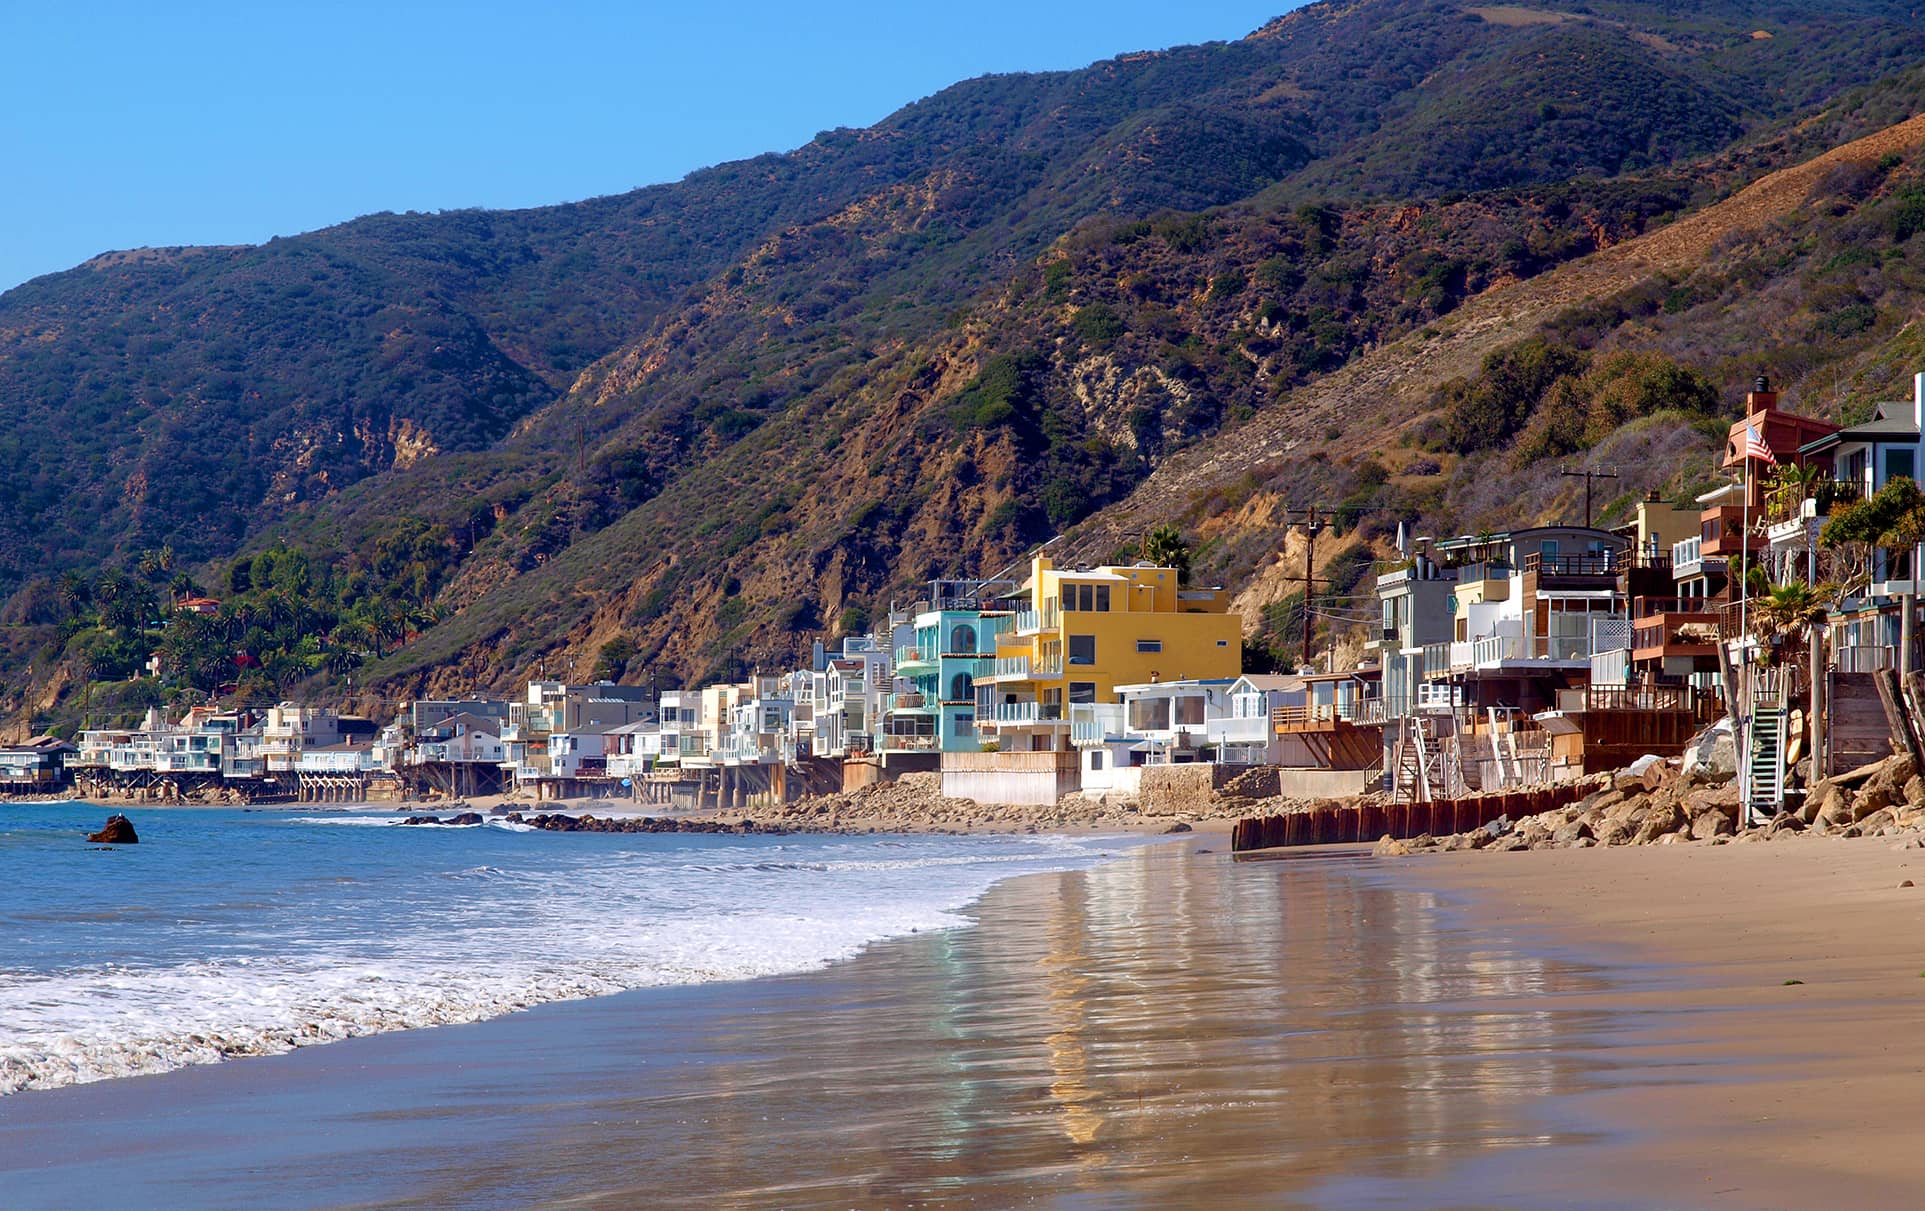 Malibu beach in CA with homes along the sand and rocky cliffs